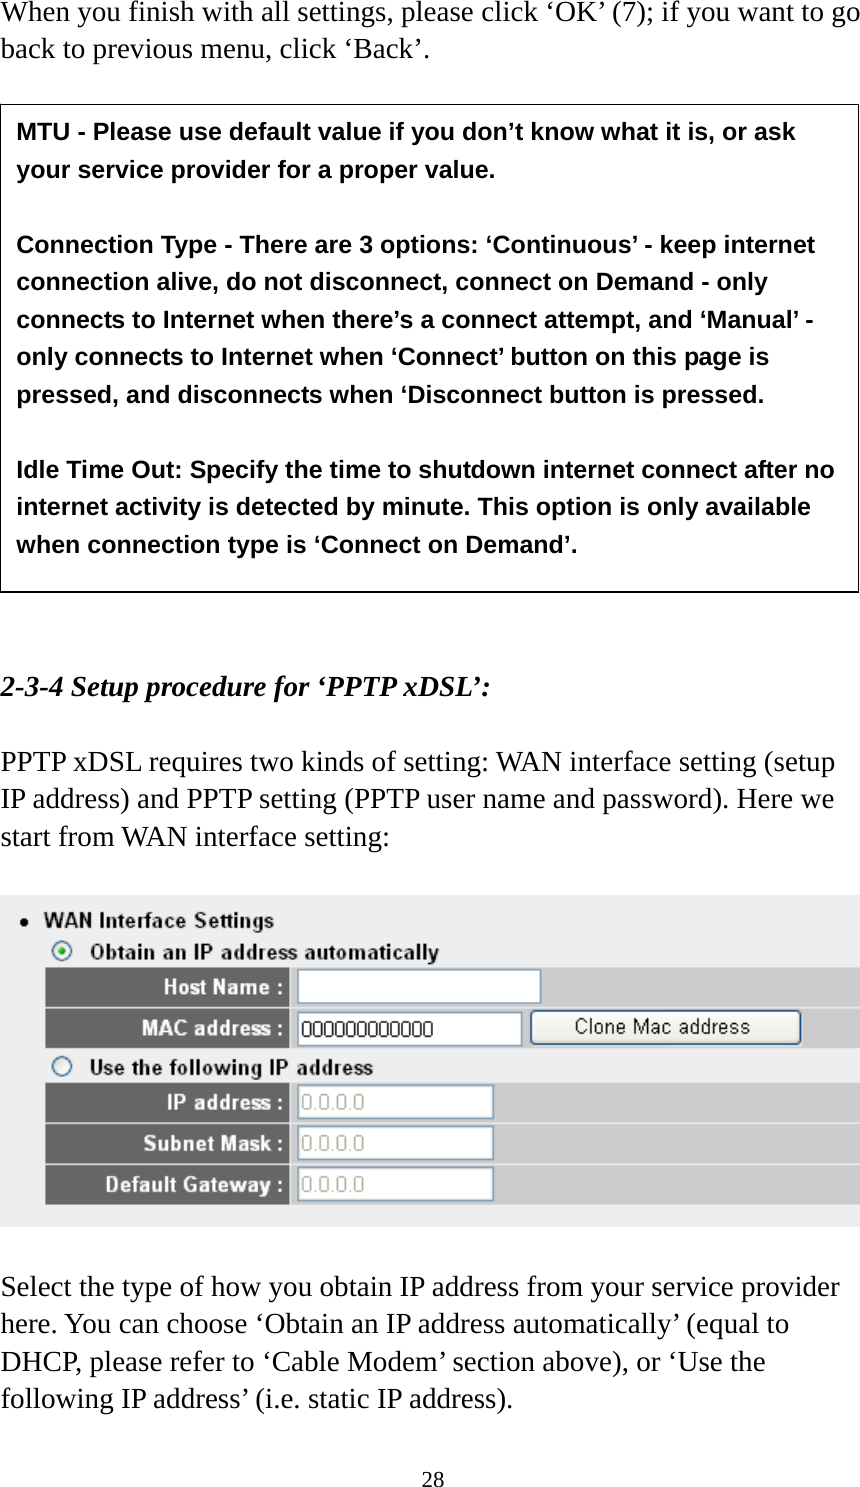 28 When you finish with all settings, please click ‘OK’ (7); if you want to go back to previous menu, click ‘Back’.                  2-3-4 Setup procedure for ‘PPTP xDSL’:  PPTP xDSL requires two kinds of setting: WAN interface setting (setup IP address) and PPTP setting (PPTP user name and password). Here we start from WAN interface setting:    Select the type of how you obtain IP address from your service provider here. You can choose ‘Obtain an IP address automatically’ (equal to DHCP, please refer to ‘Cable Modem’ section above), or ‘Use the following IP address’ (i.e. static IP address).   MTU - Please use default value if you don’t know what it is, or ask your service provider for a proper value.  Connection Type - There are 3 options: ‘Continuous’ - keep internet connection alive, do not disconnect, connect on Demand - only connects to Internet when there’s a connect attempt, and ‘Manual’ - only connects to Internet when ‘Connect’ button on this page is pressed, and disconnects when ‘Disconnect button is pressed.  Idle Time Out: Specify the time to shutdown internet connect after no internet activity is detected by minute. This option is only available when connection type is ‘Connect on Demand’. 